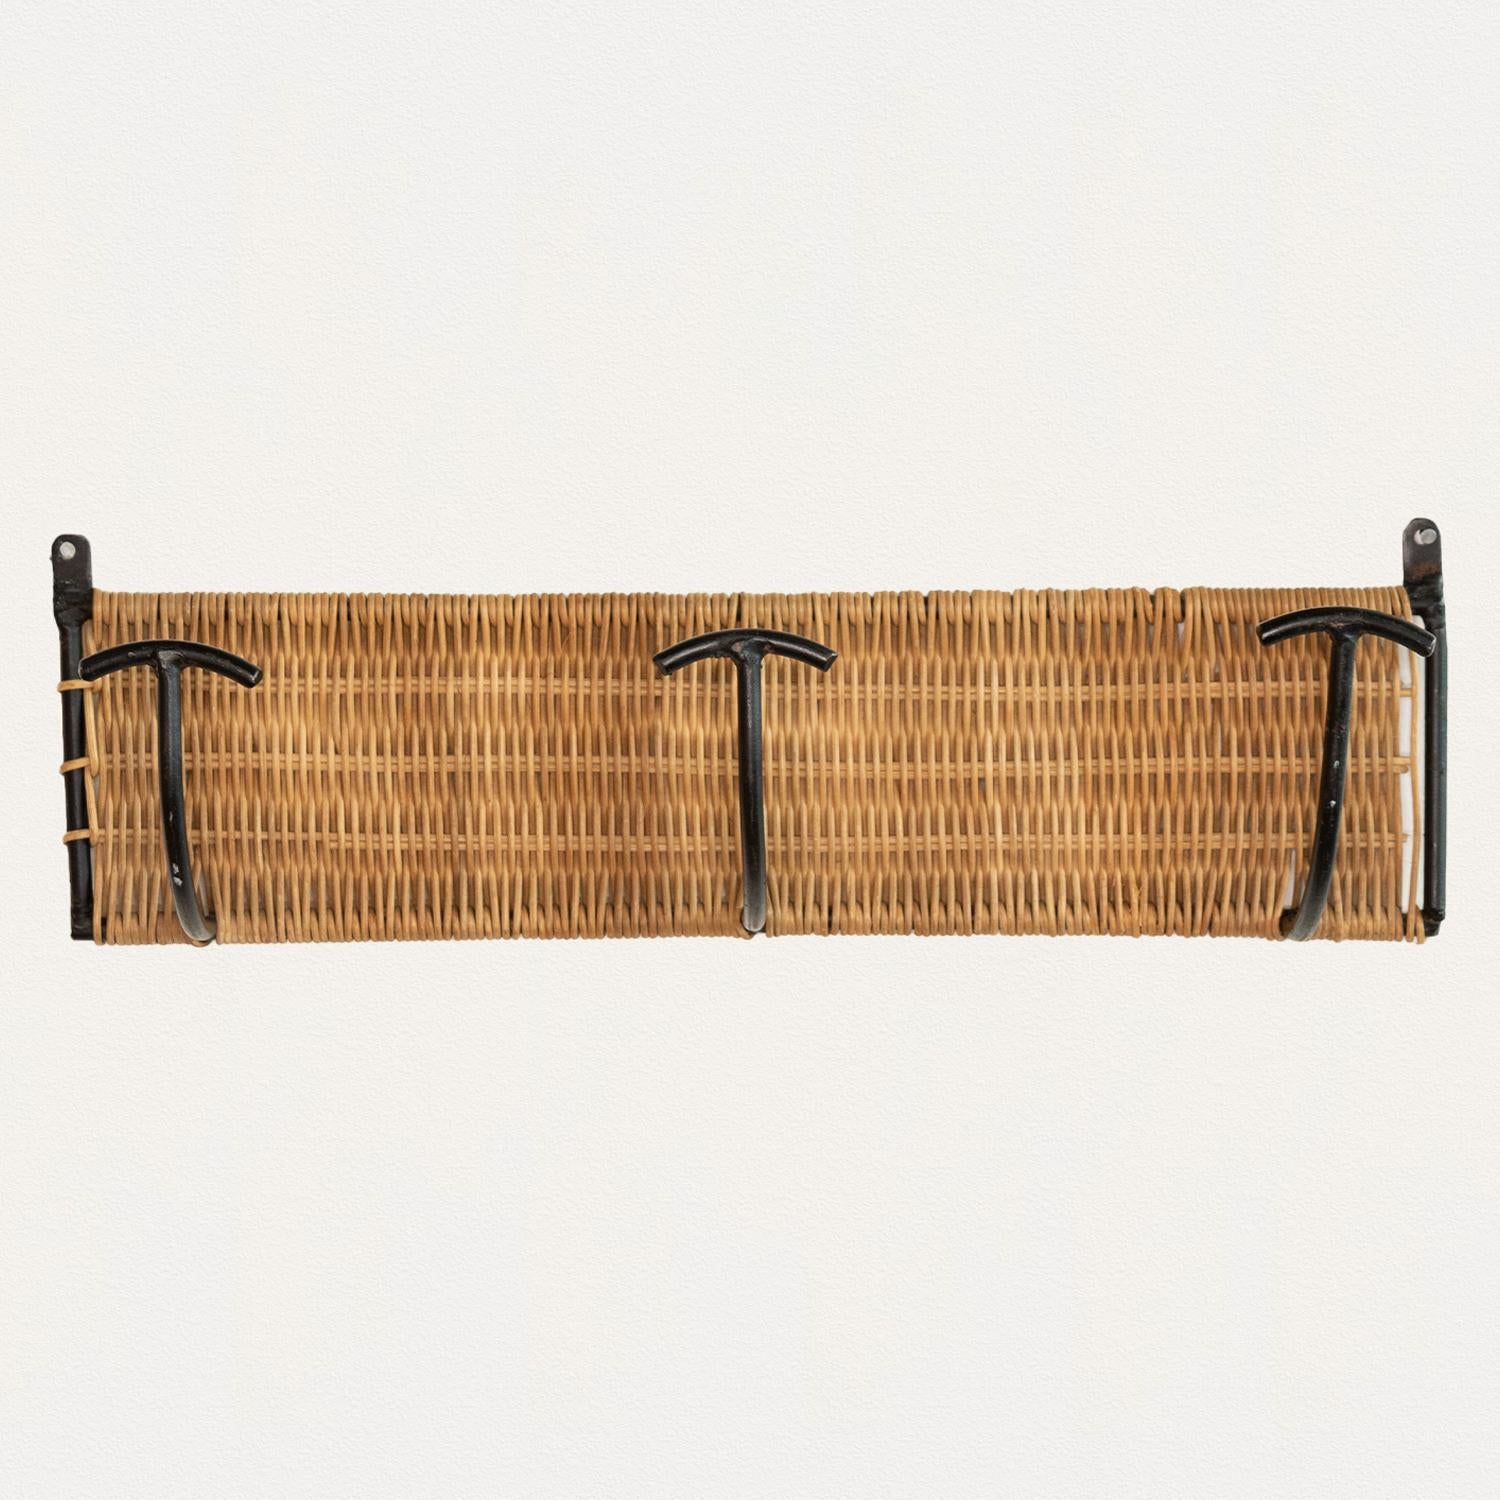 Vintage woven wicker wall rack with 3 iron hooks to hang coats or hats. Black painted iron and wicker is all original. Beautiful and functional piece from France, 1950s. Three available.